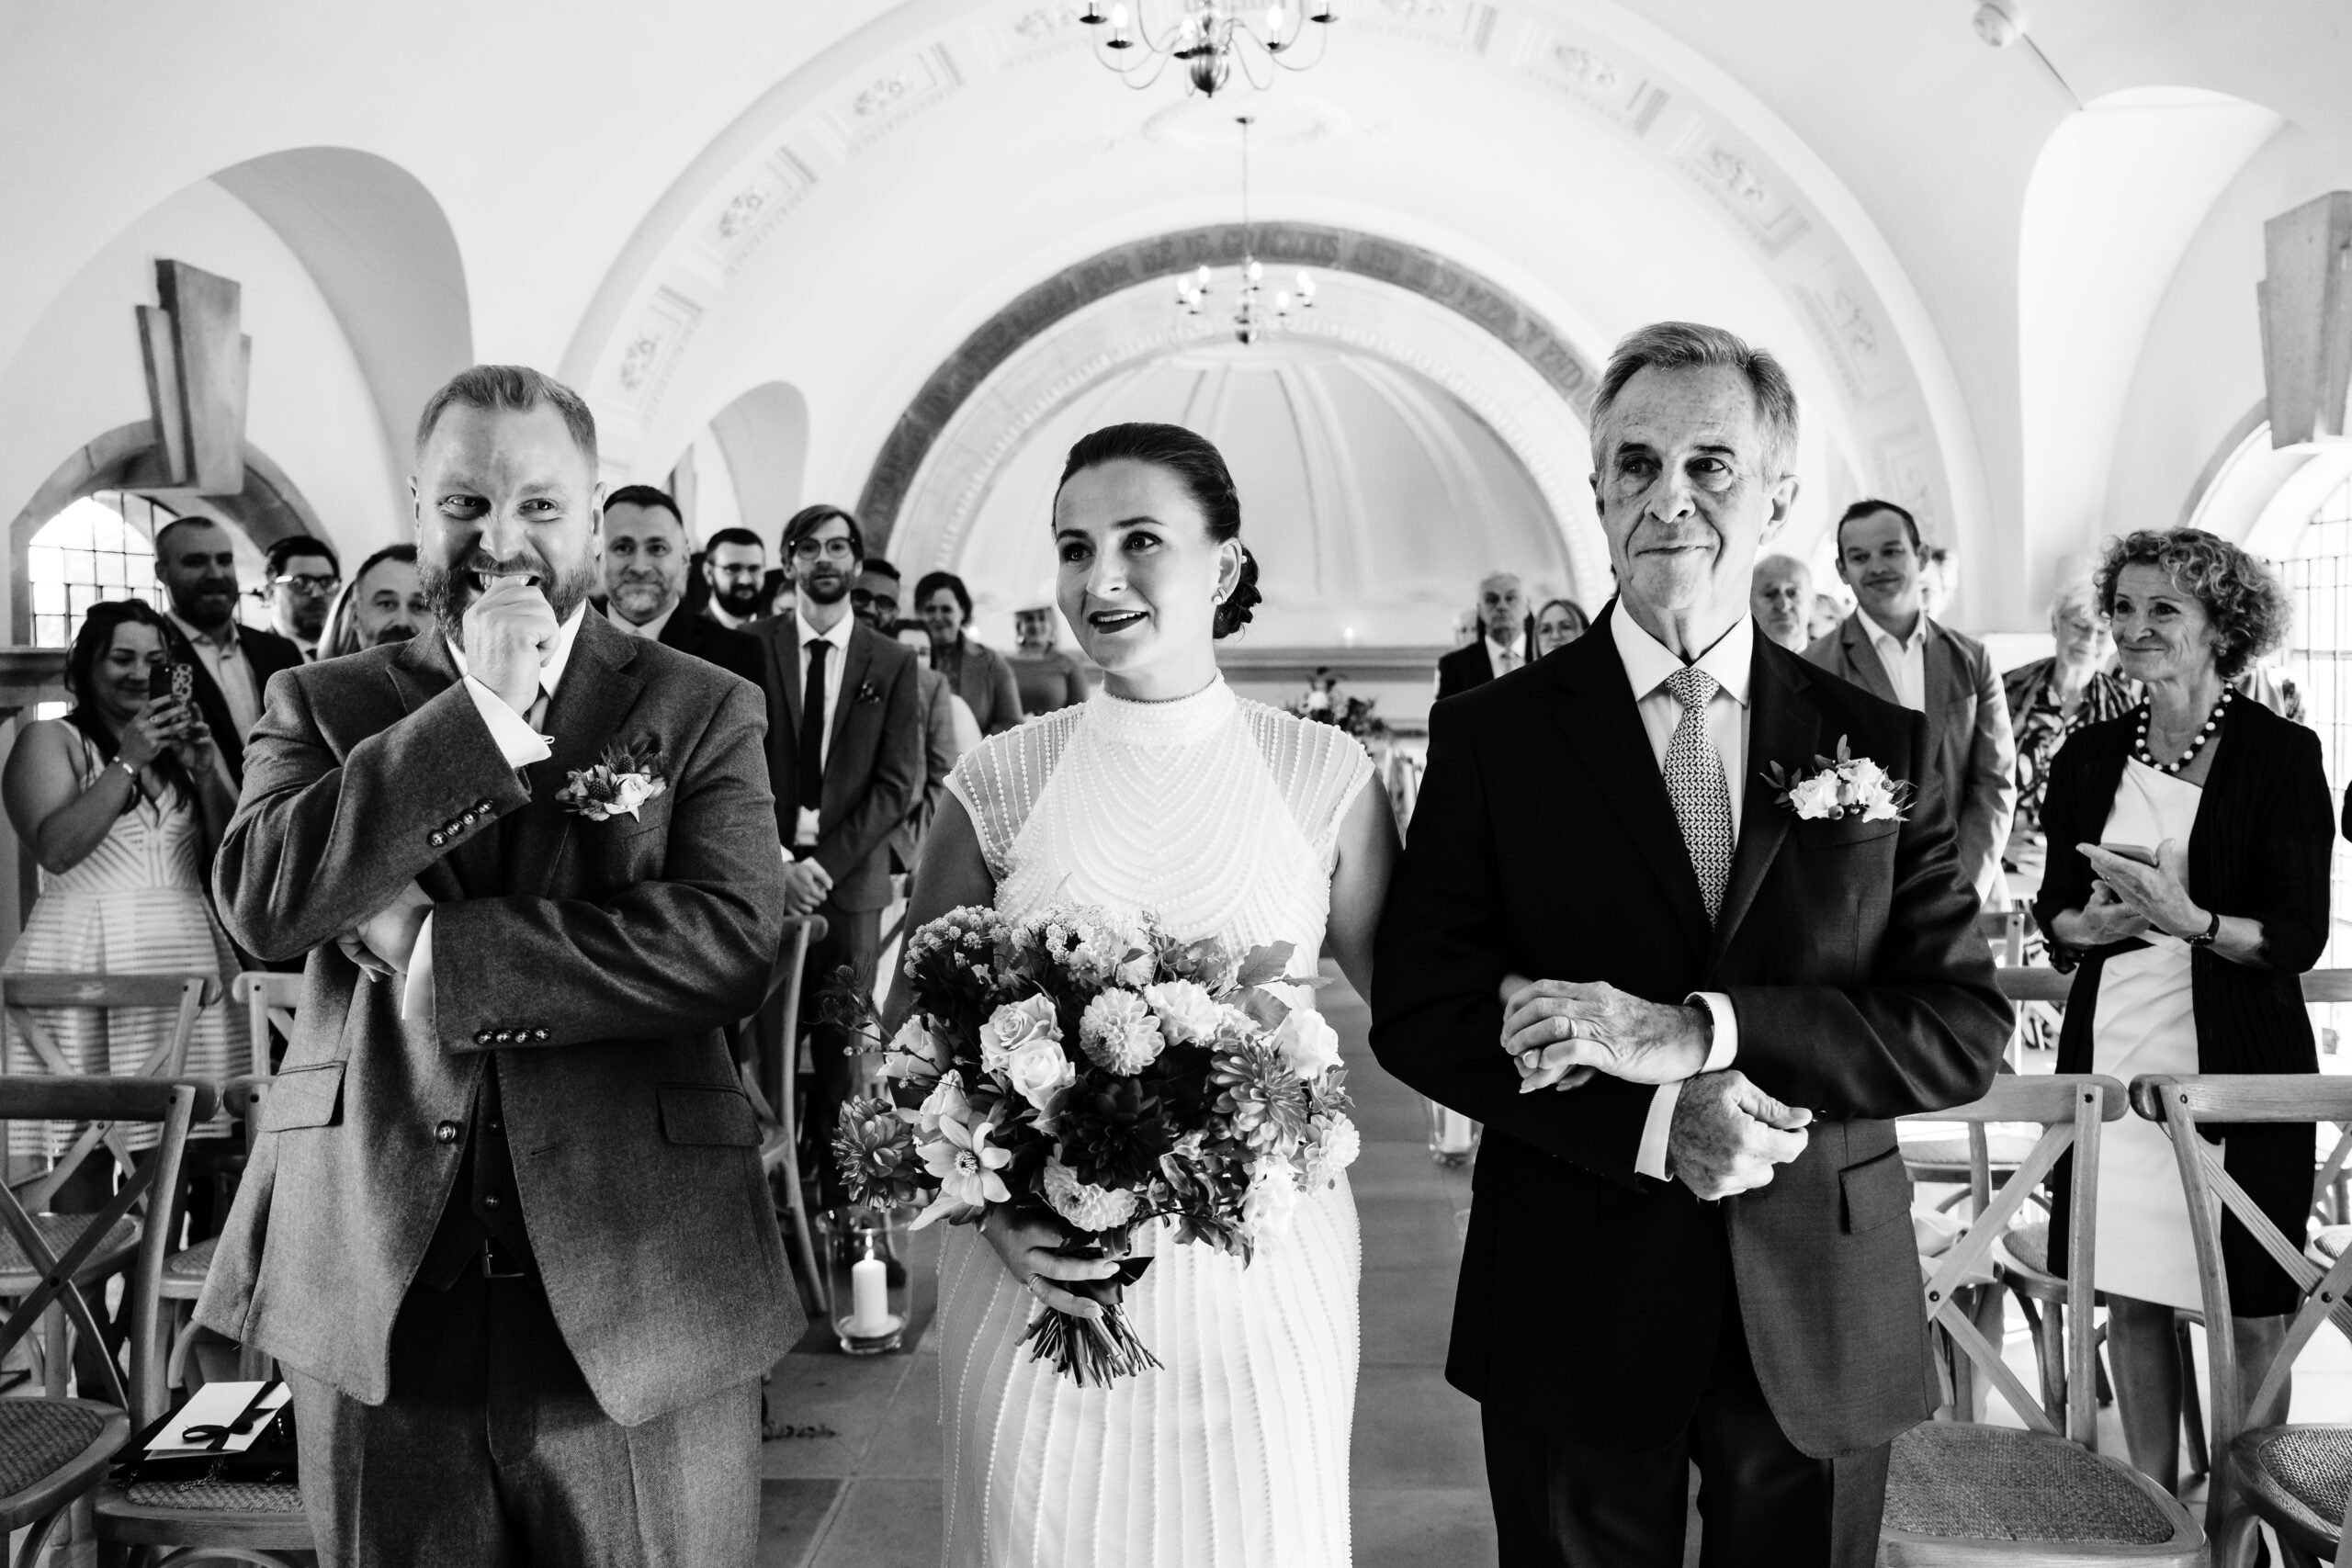 A rutland water wedding at normanton church groom seeing his bride for the first time